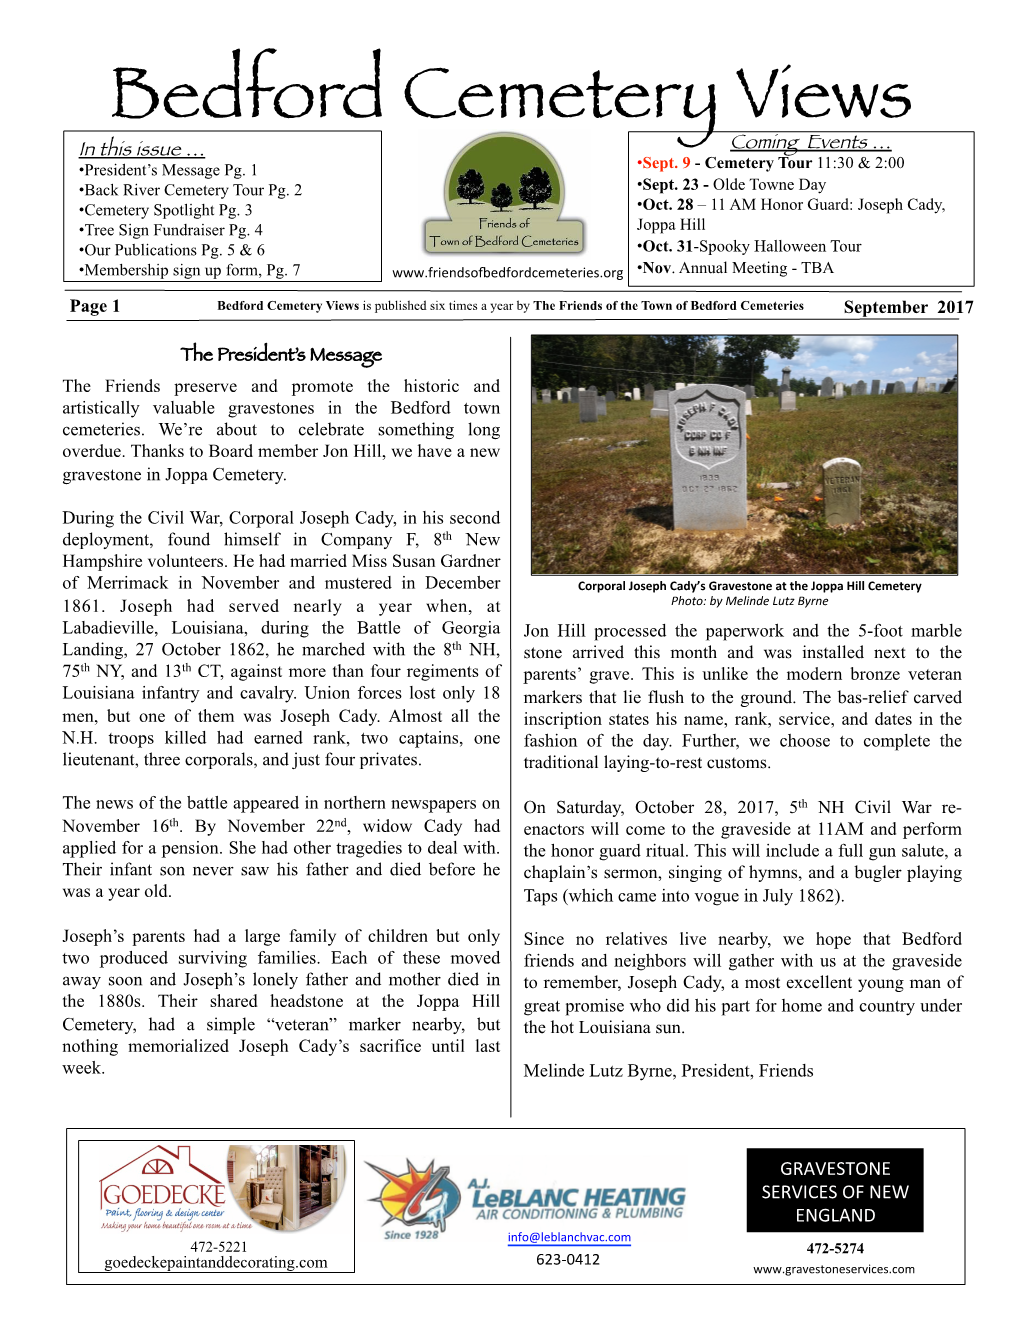 Bedford Cemetery Views Is Published Six Times a Year by the Friends of the Town of Bedford Cemeteries September 2017